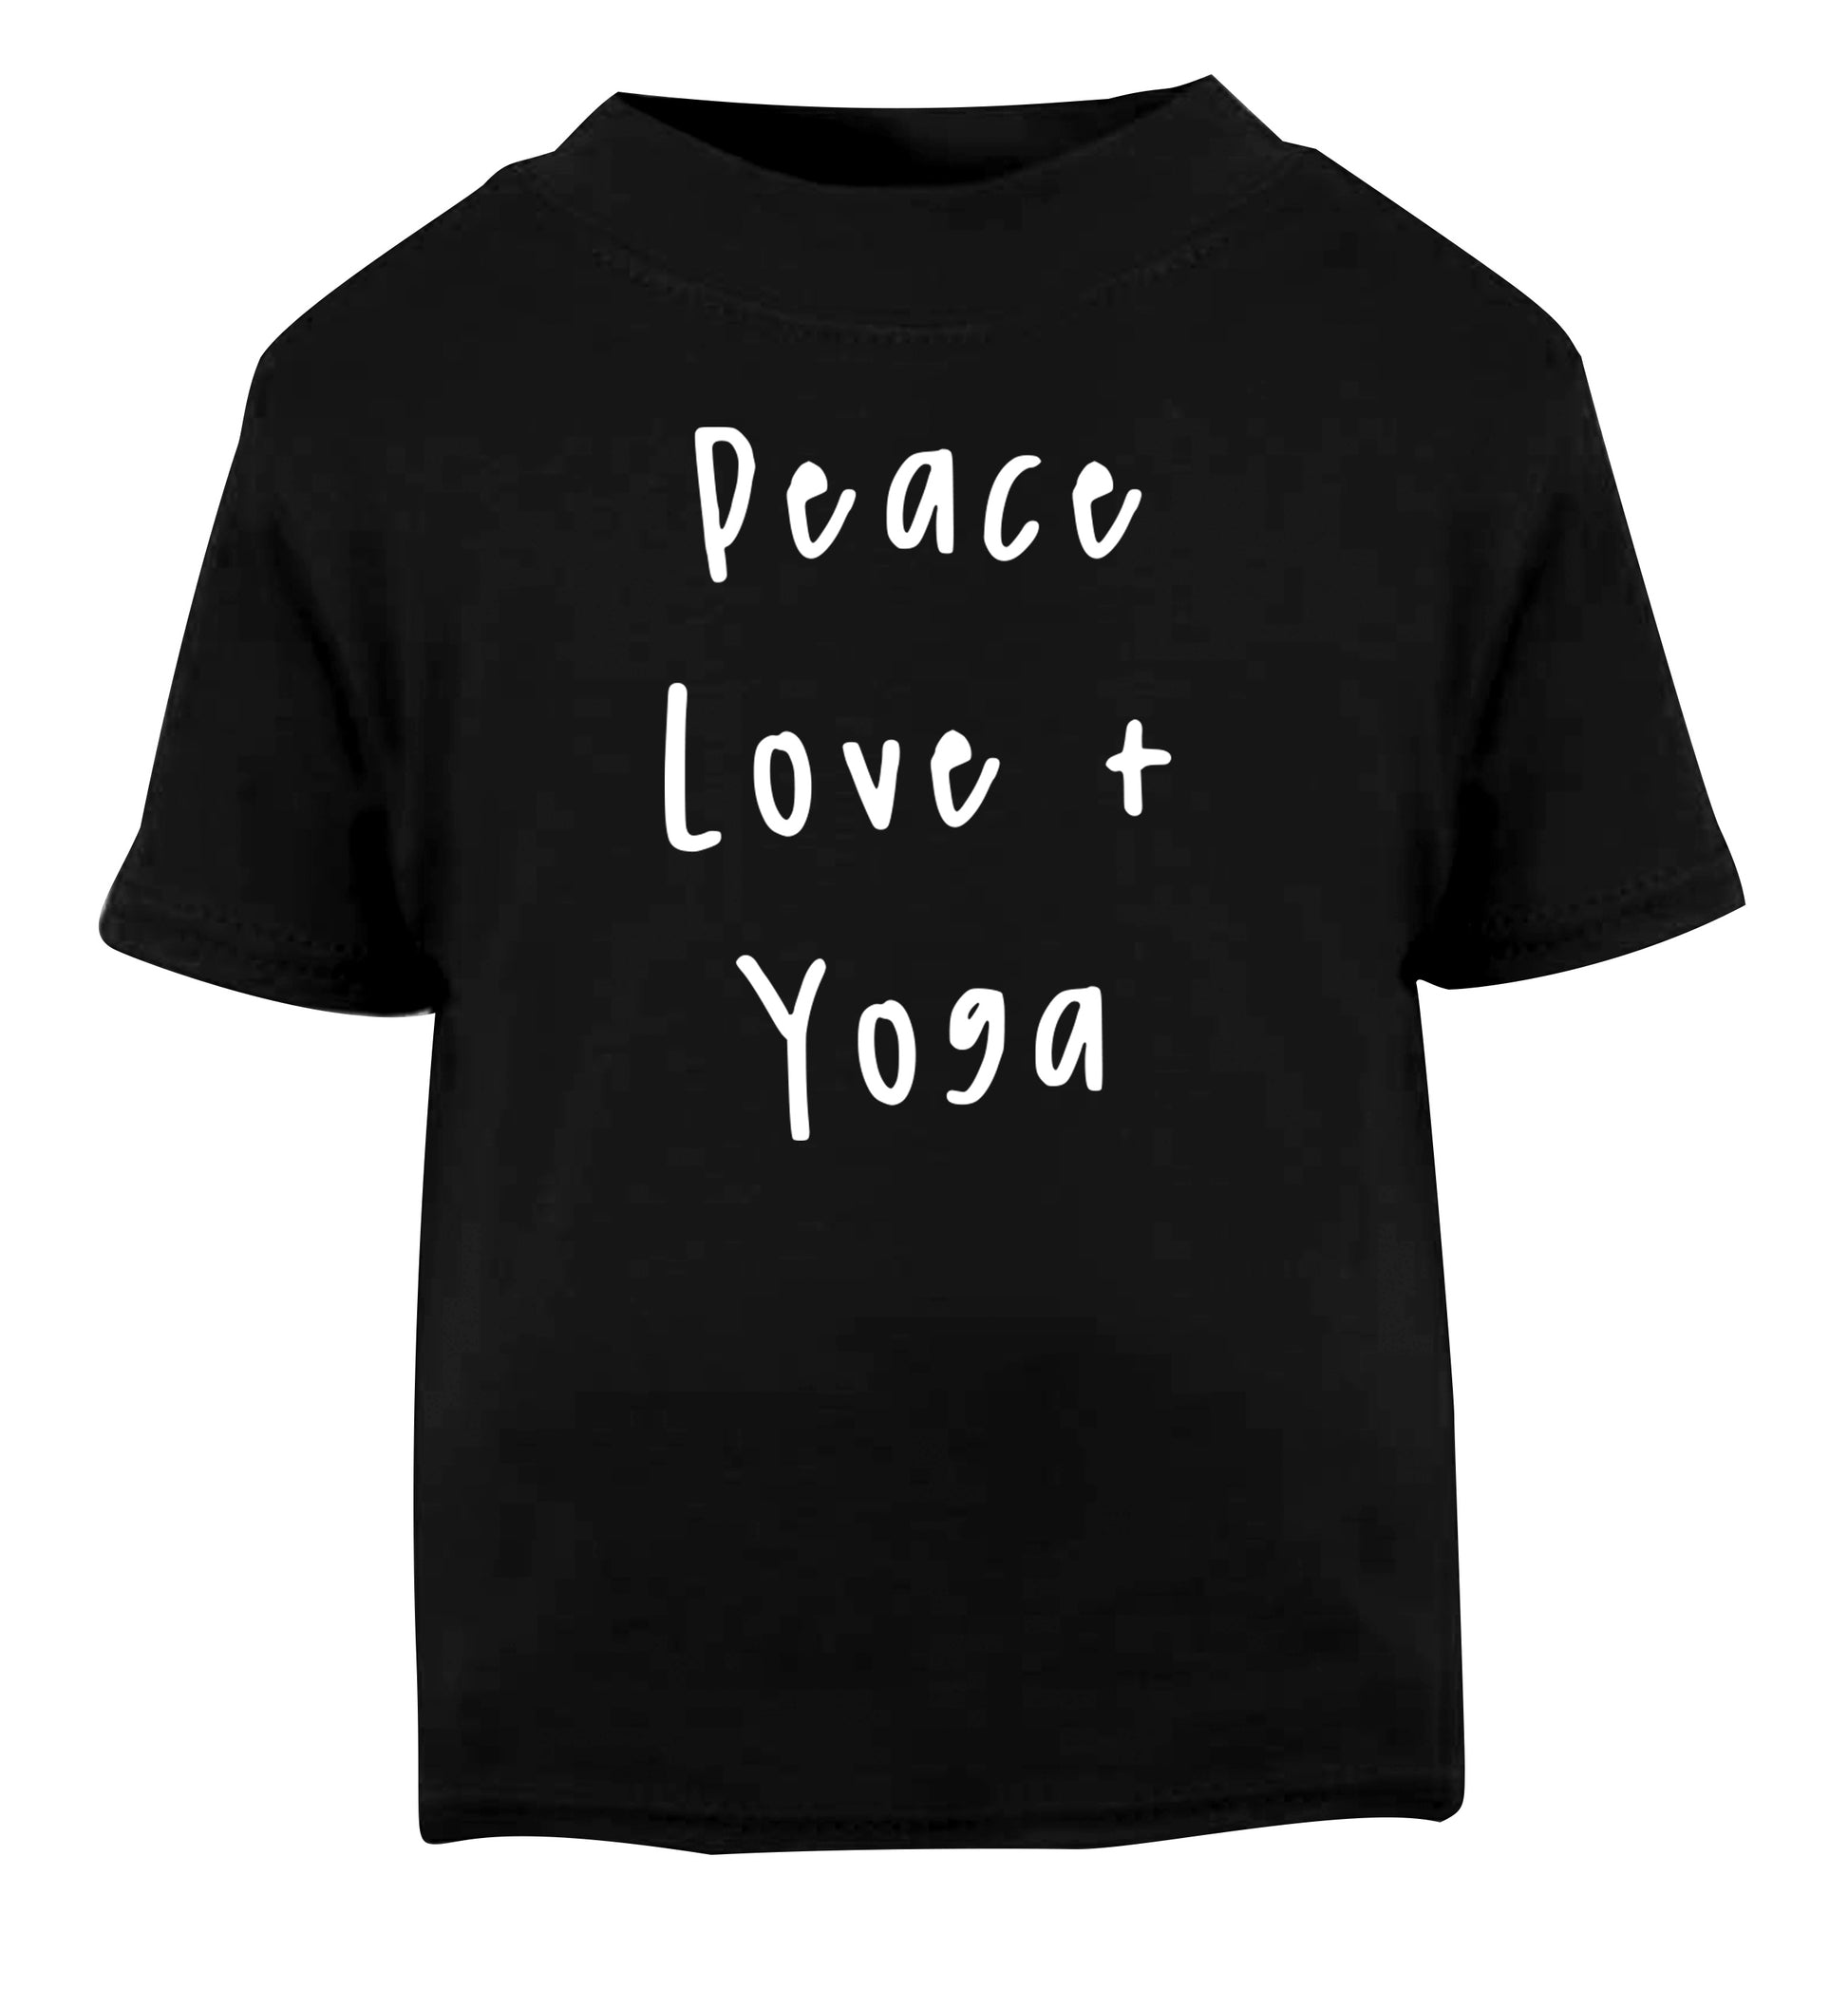 Peace love and yoga Black Baby Toddler Tshirt 2 years